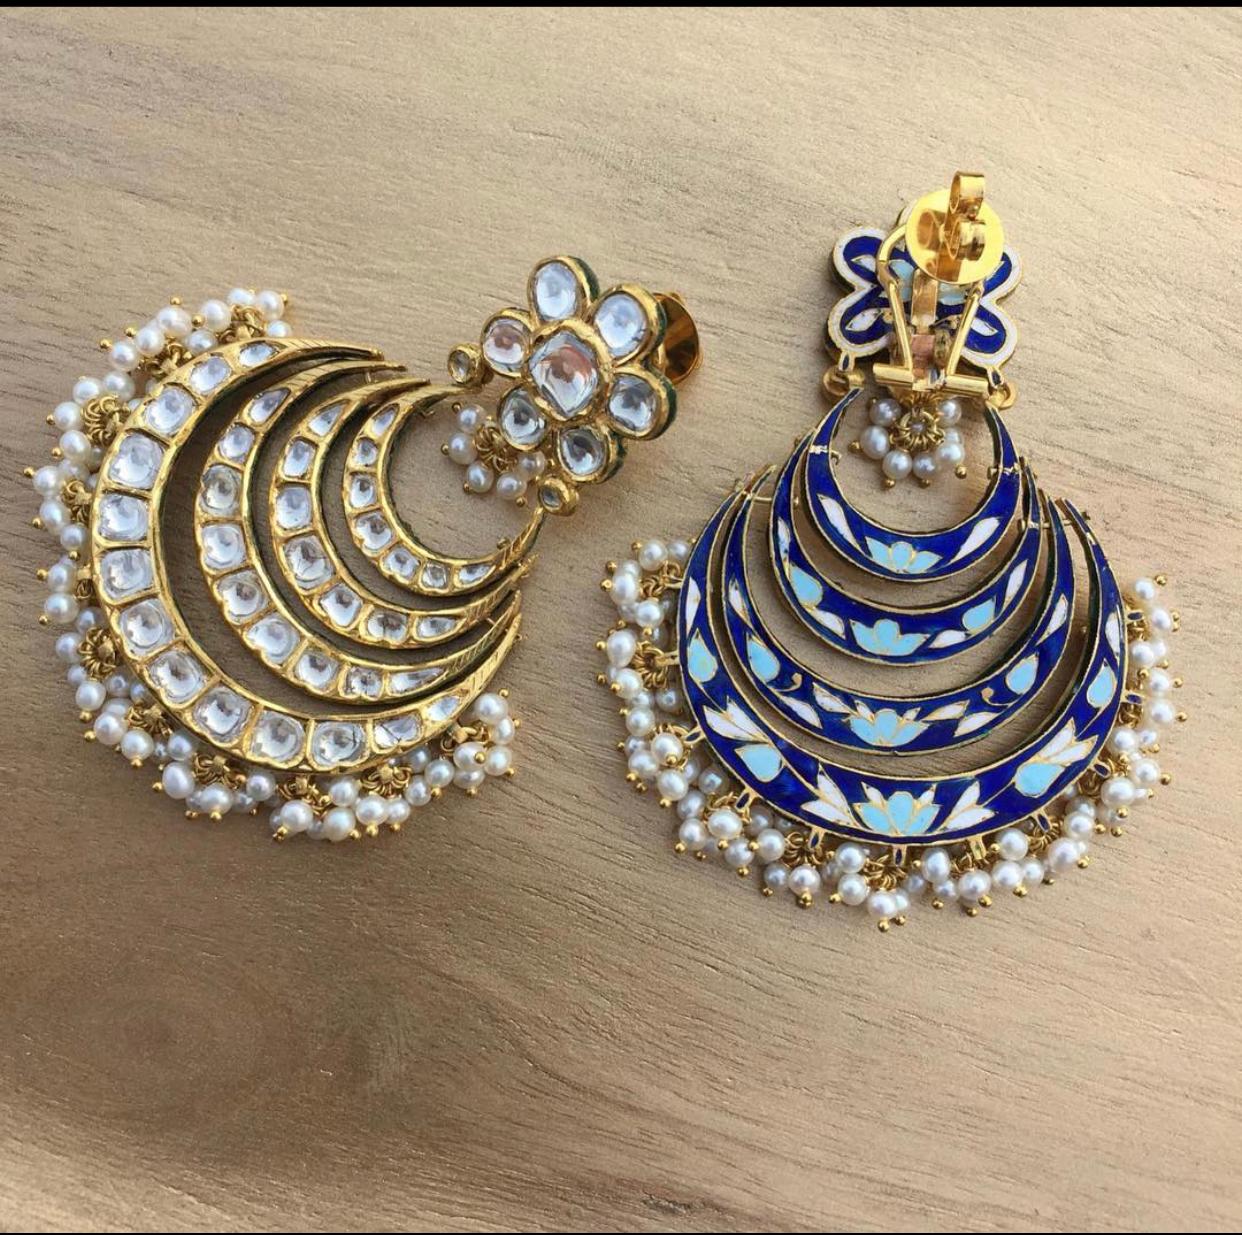 A pair of Chandelier earring know as 